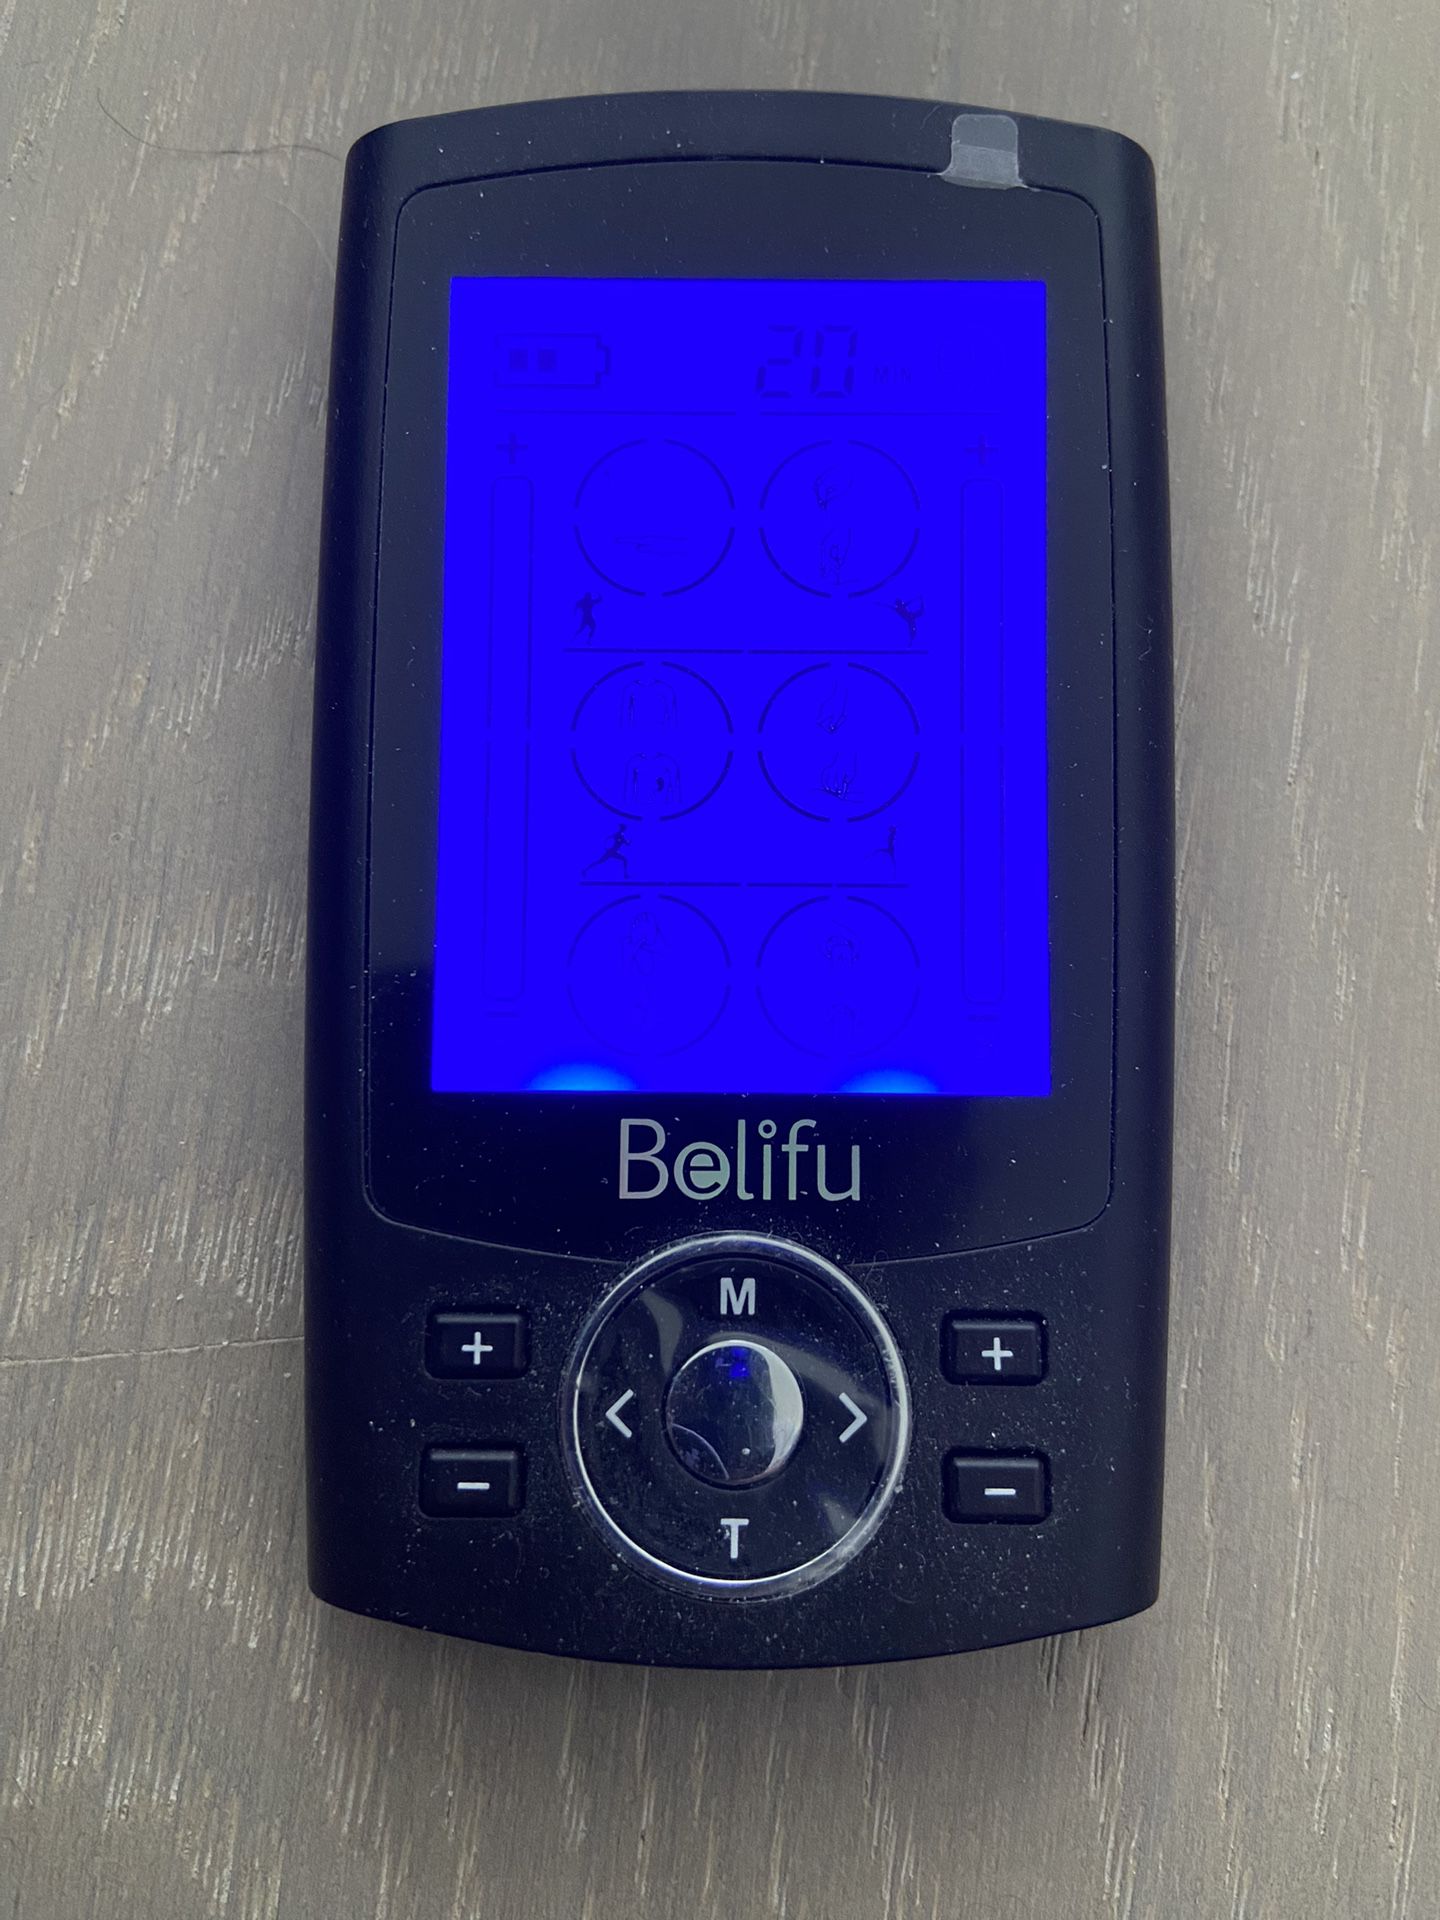 Belifu Dual Channel TENS EMS Unit for Sale in New York, NY - OfferUp